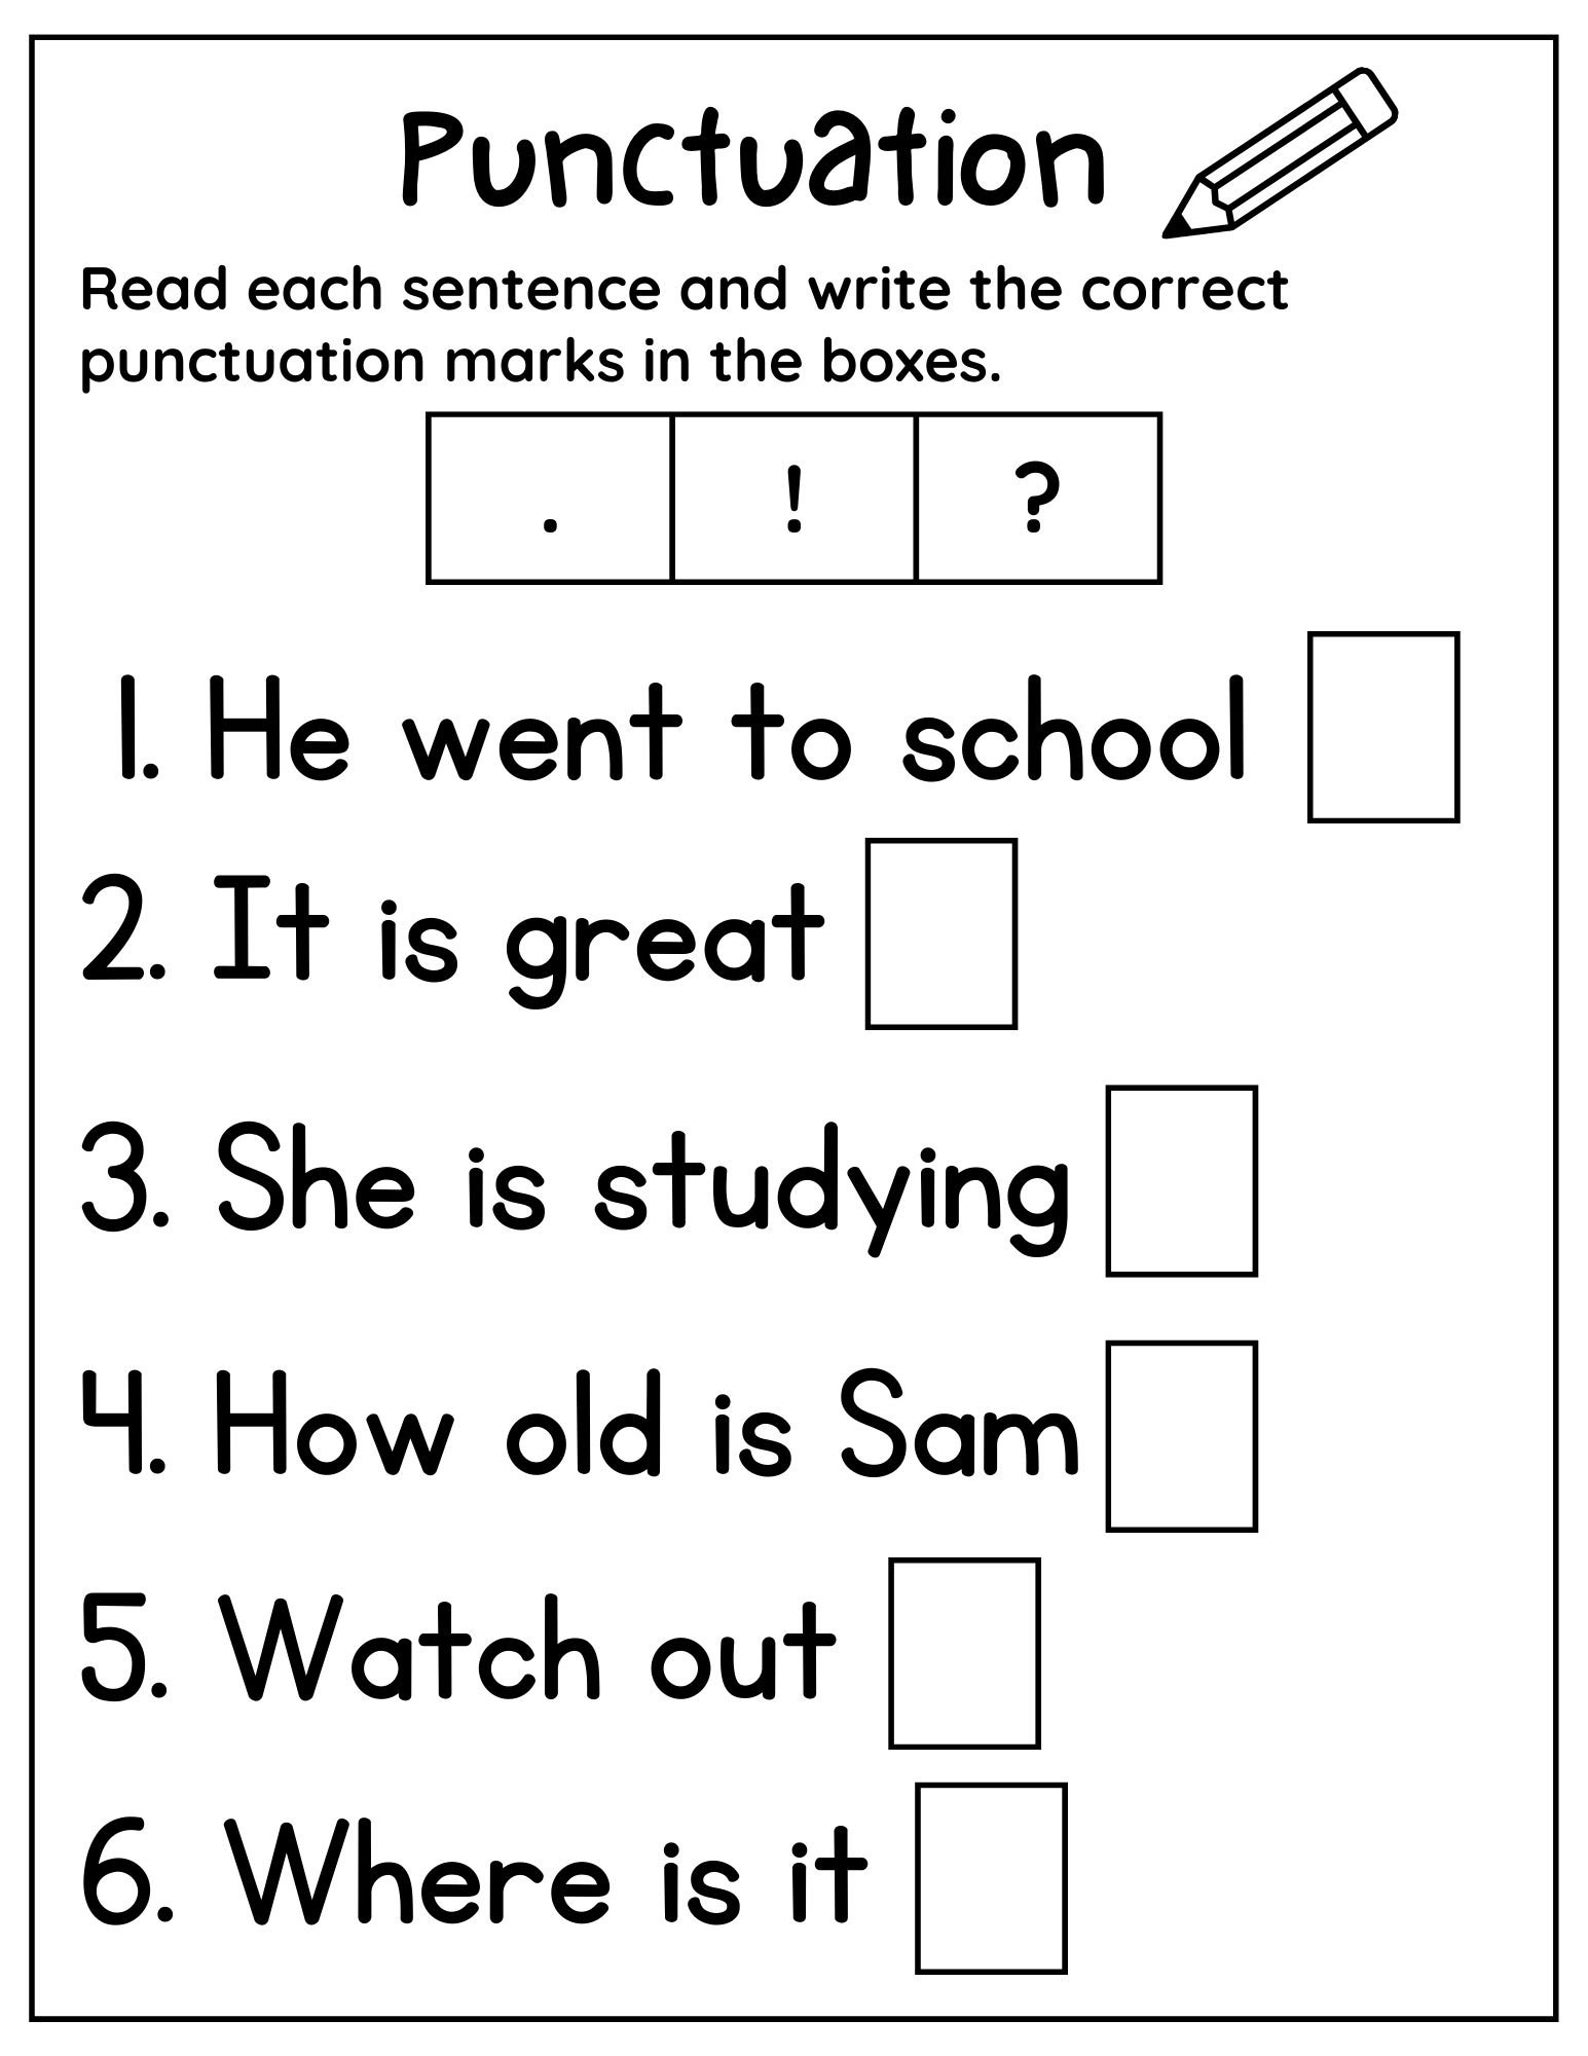 10-printable-punctuation-worksheets-punctuation-practice-worksheets